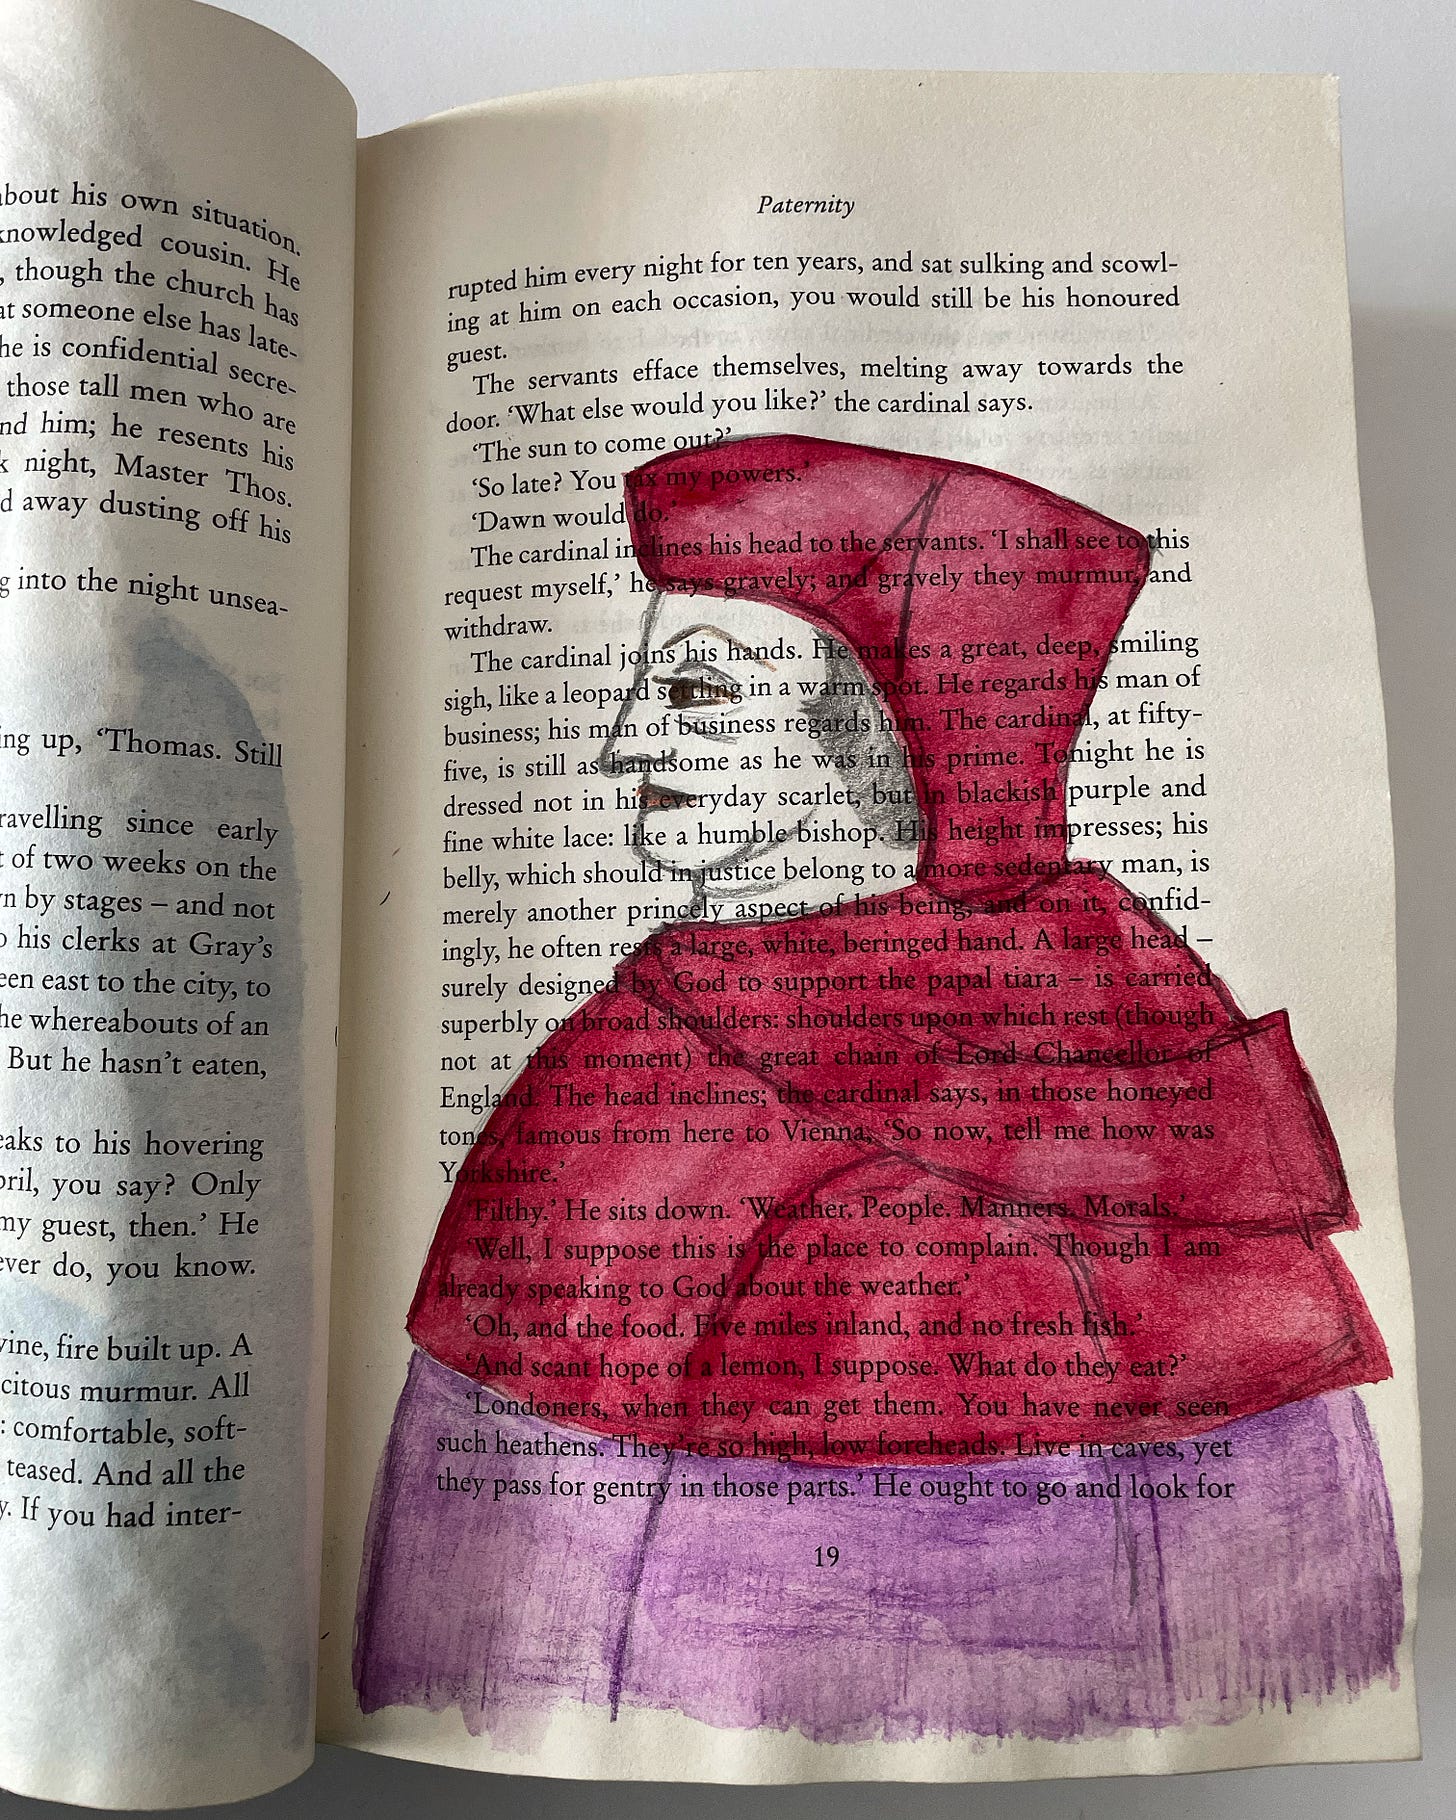 Cardinal Wolsey painted into a copy of Wolf Hall